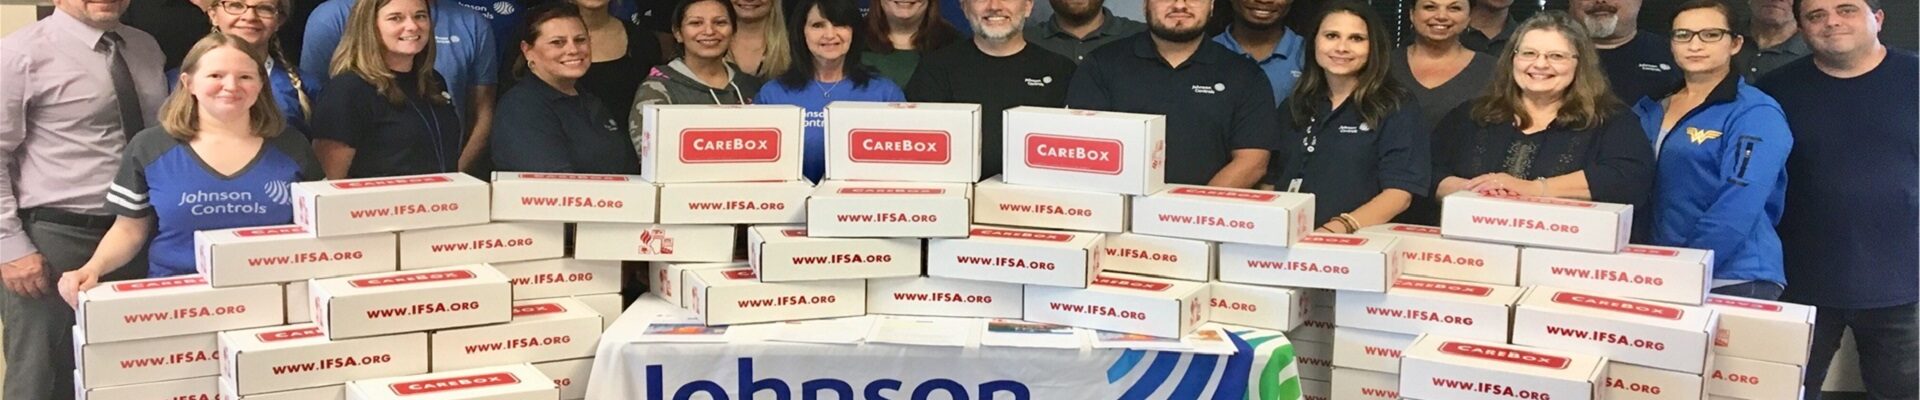 Johnson Controls volunteers pose with piles of CareBoxes